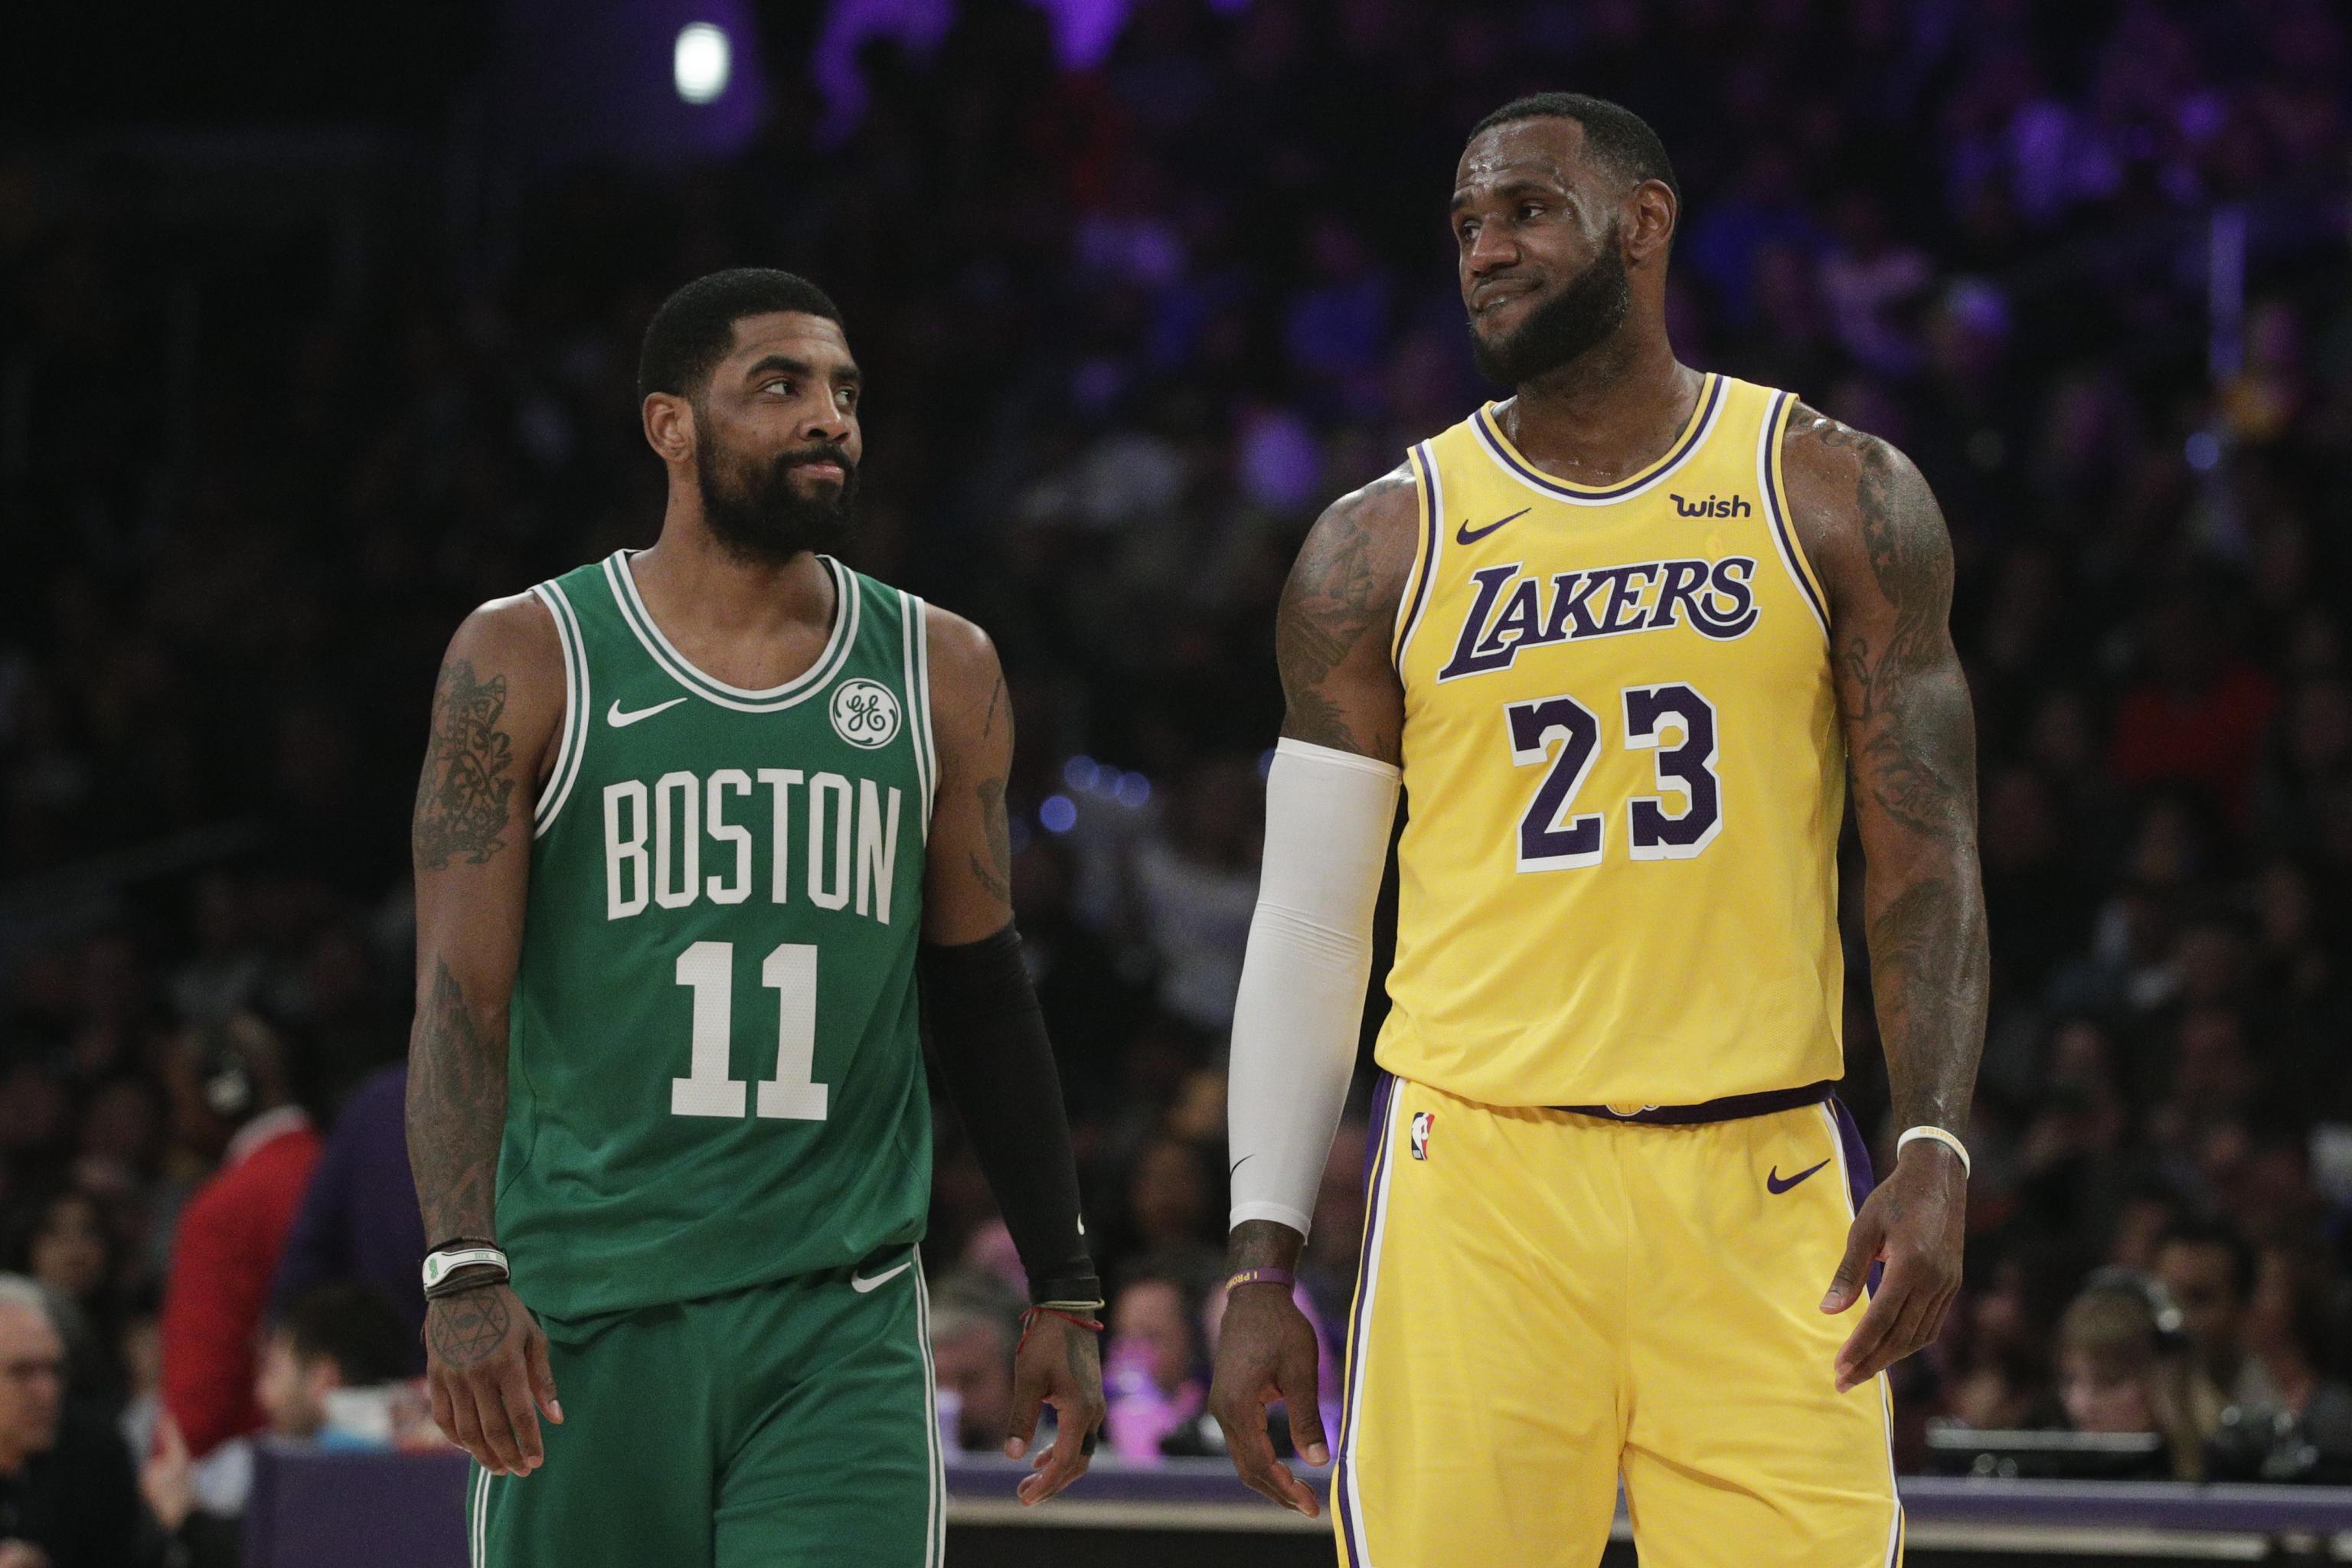 Windhorst: Kyrie Irving 'Has Had Discussions' About Joining